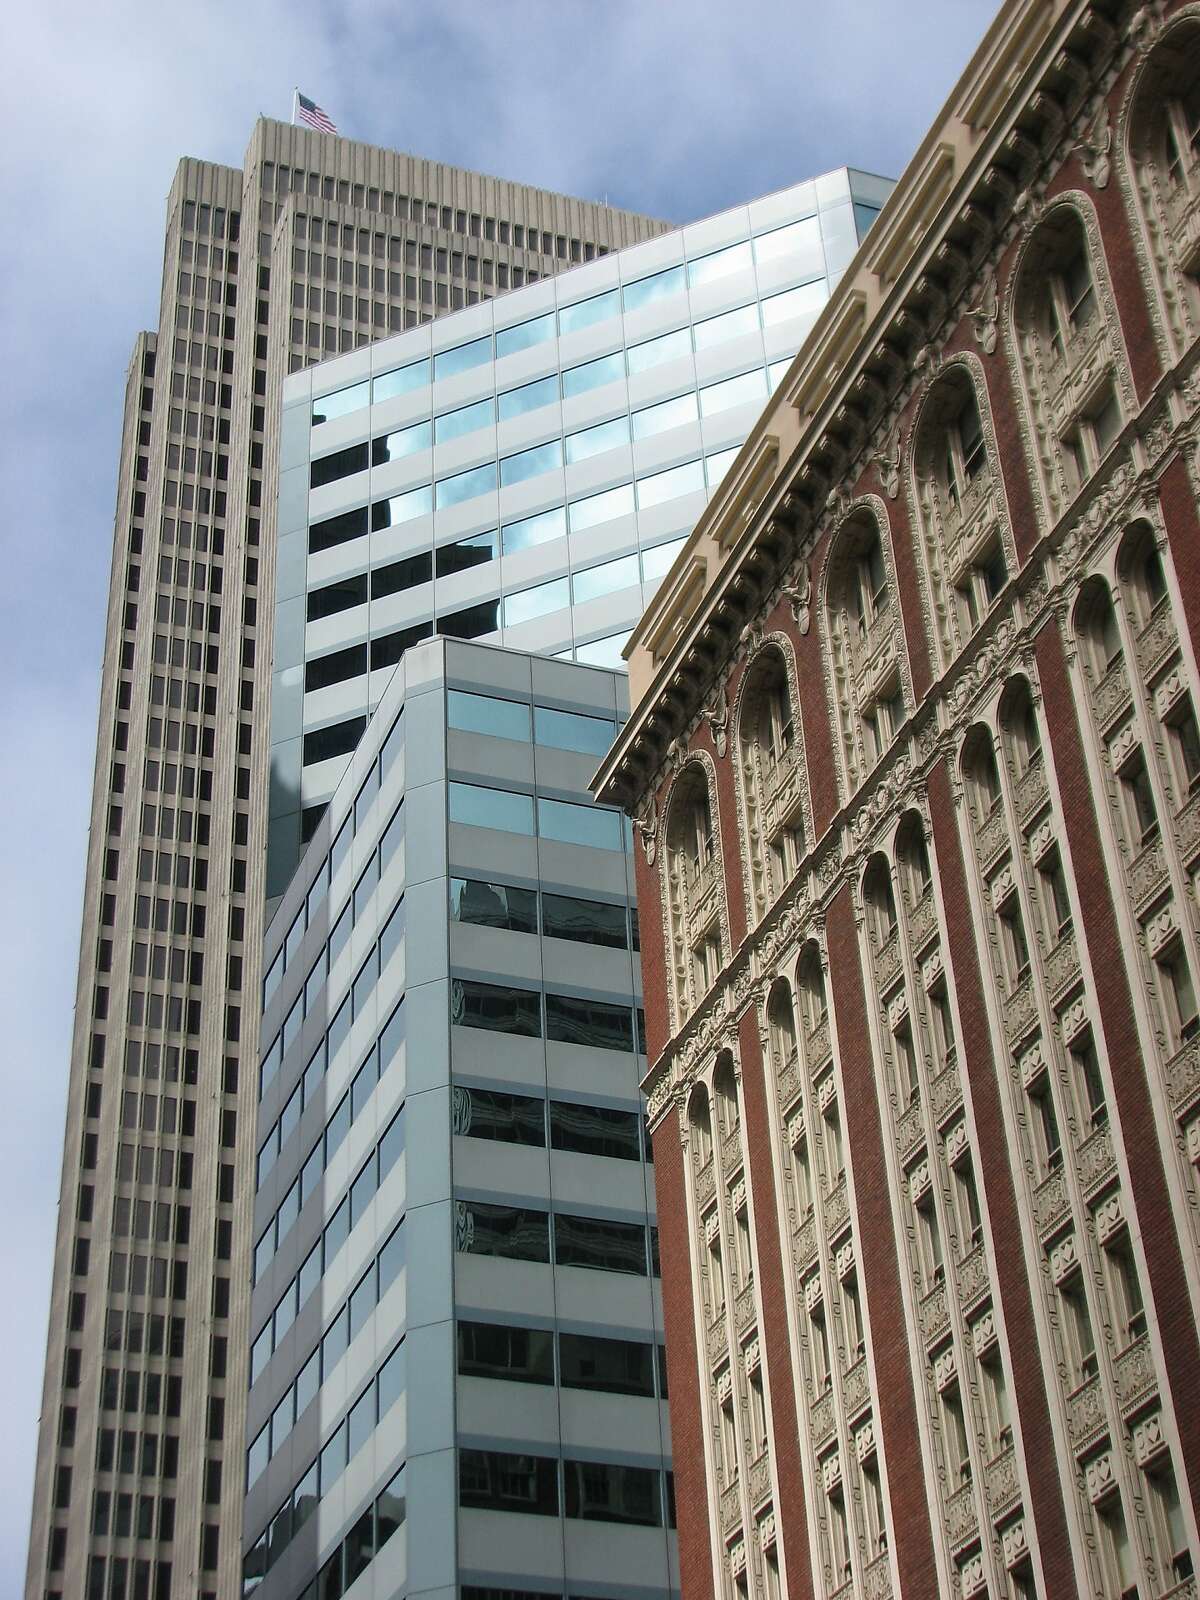 353 Sacramento is an icy metal tower in San Francisco's financial district -- an odd fit, but one that wears well with age.